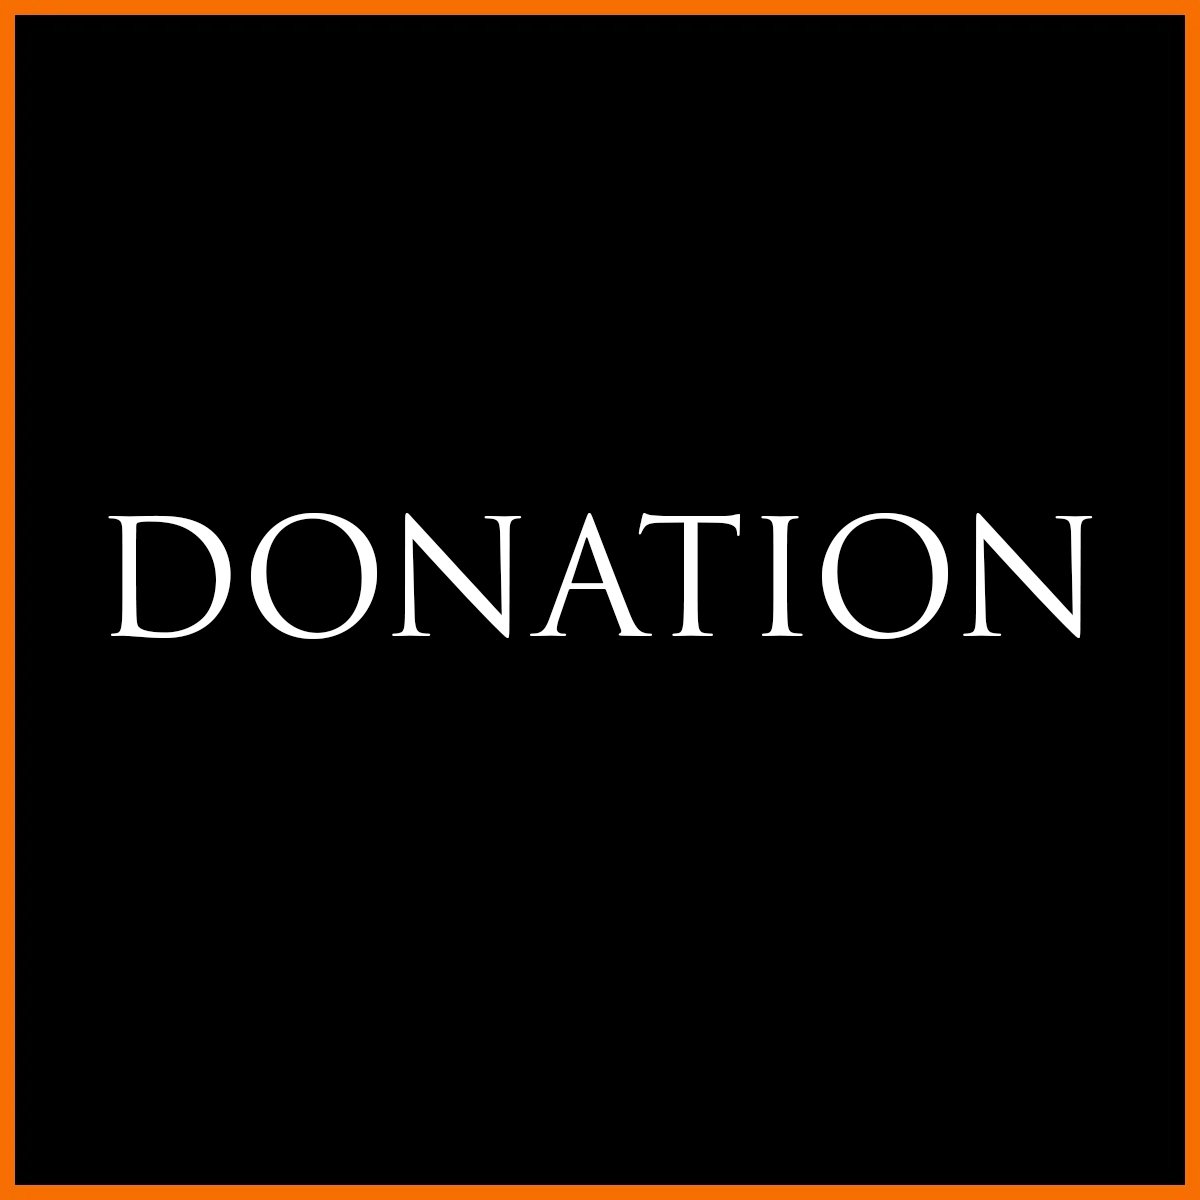 Image of Donation